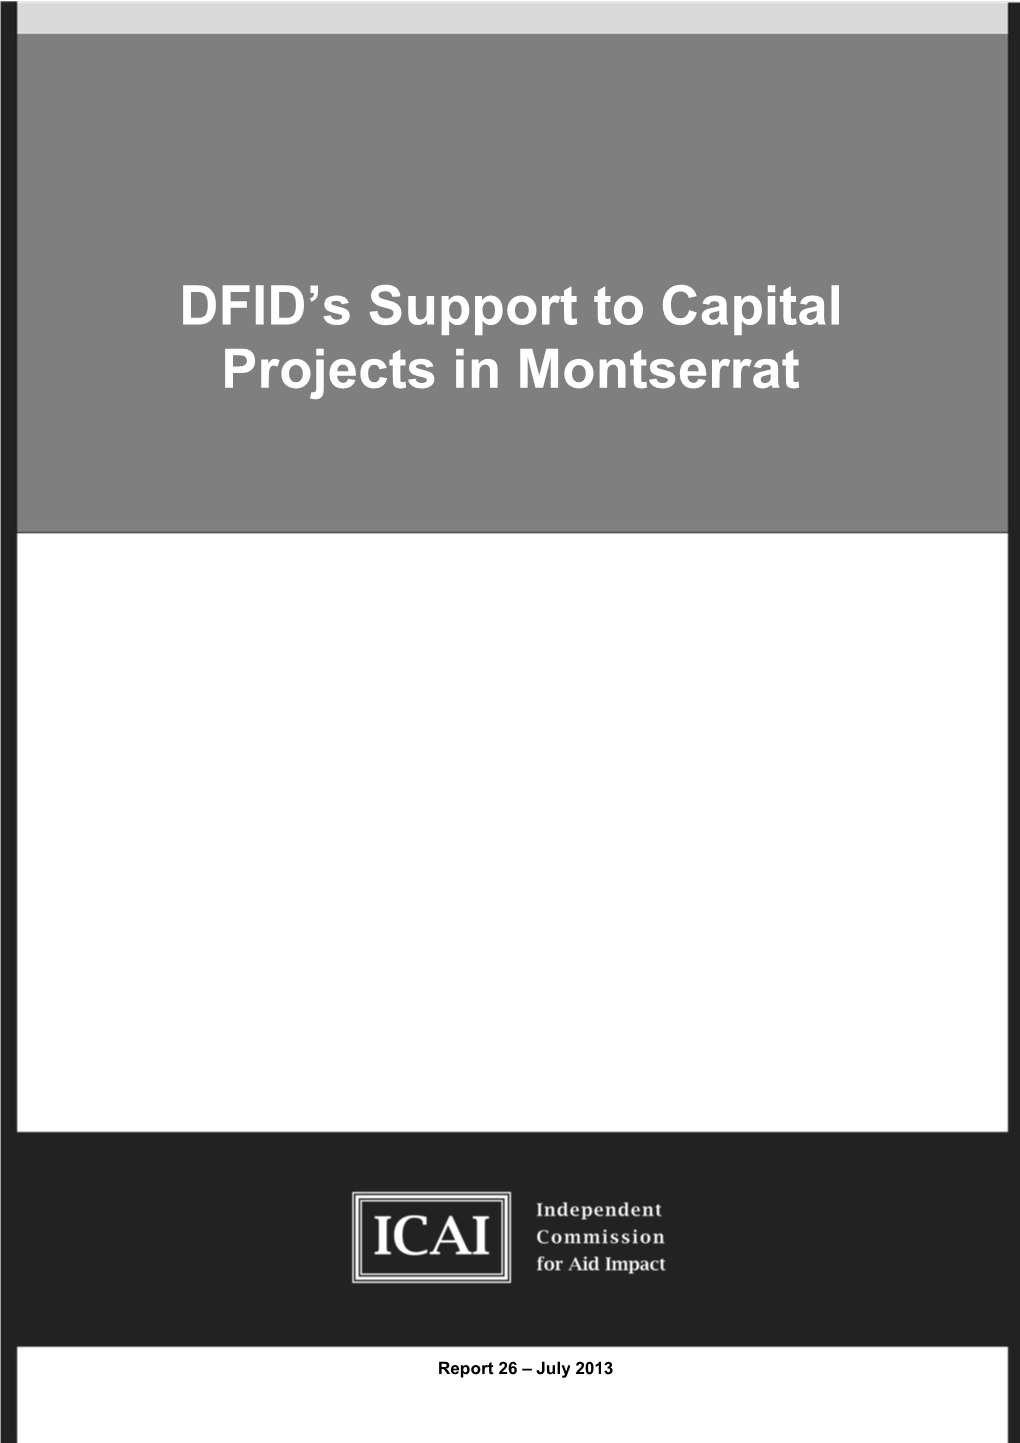 DFID's Support to Capital Projects in Montserrat